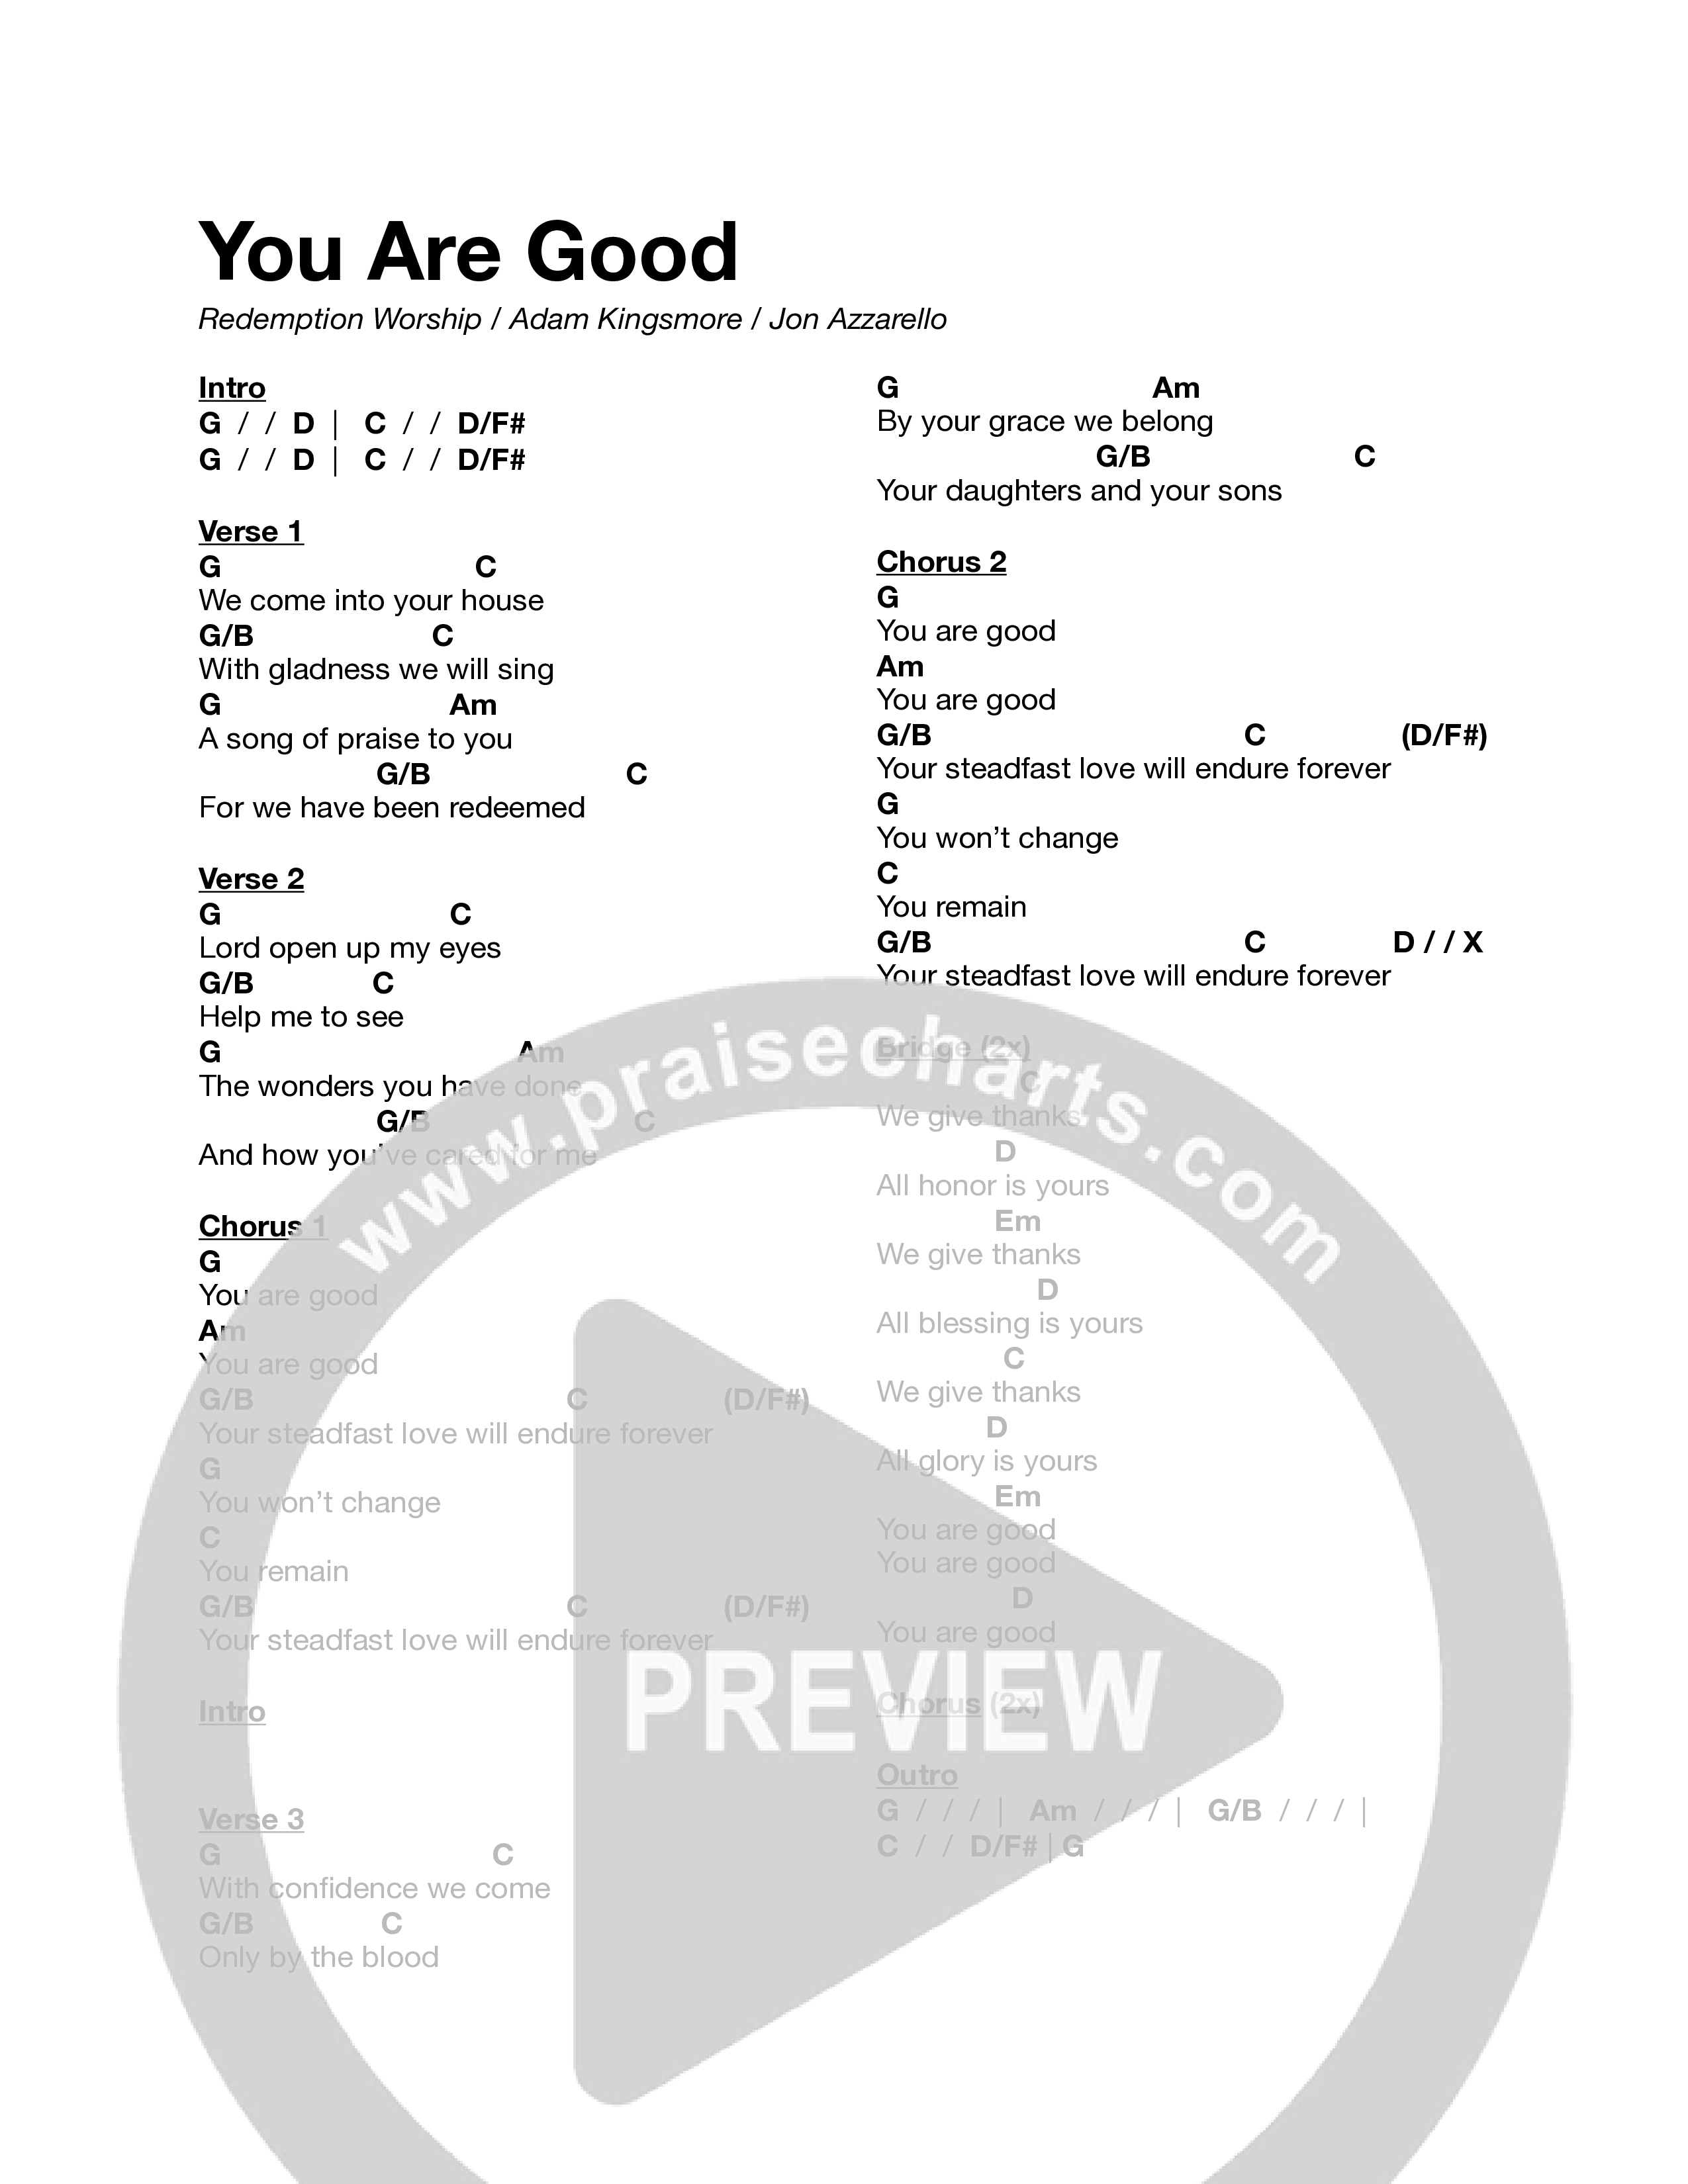 You Are Good Chord Chart (Redemption Worship)